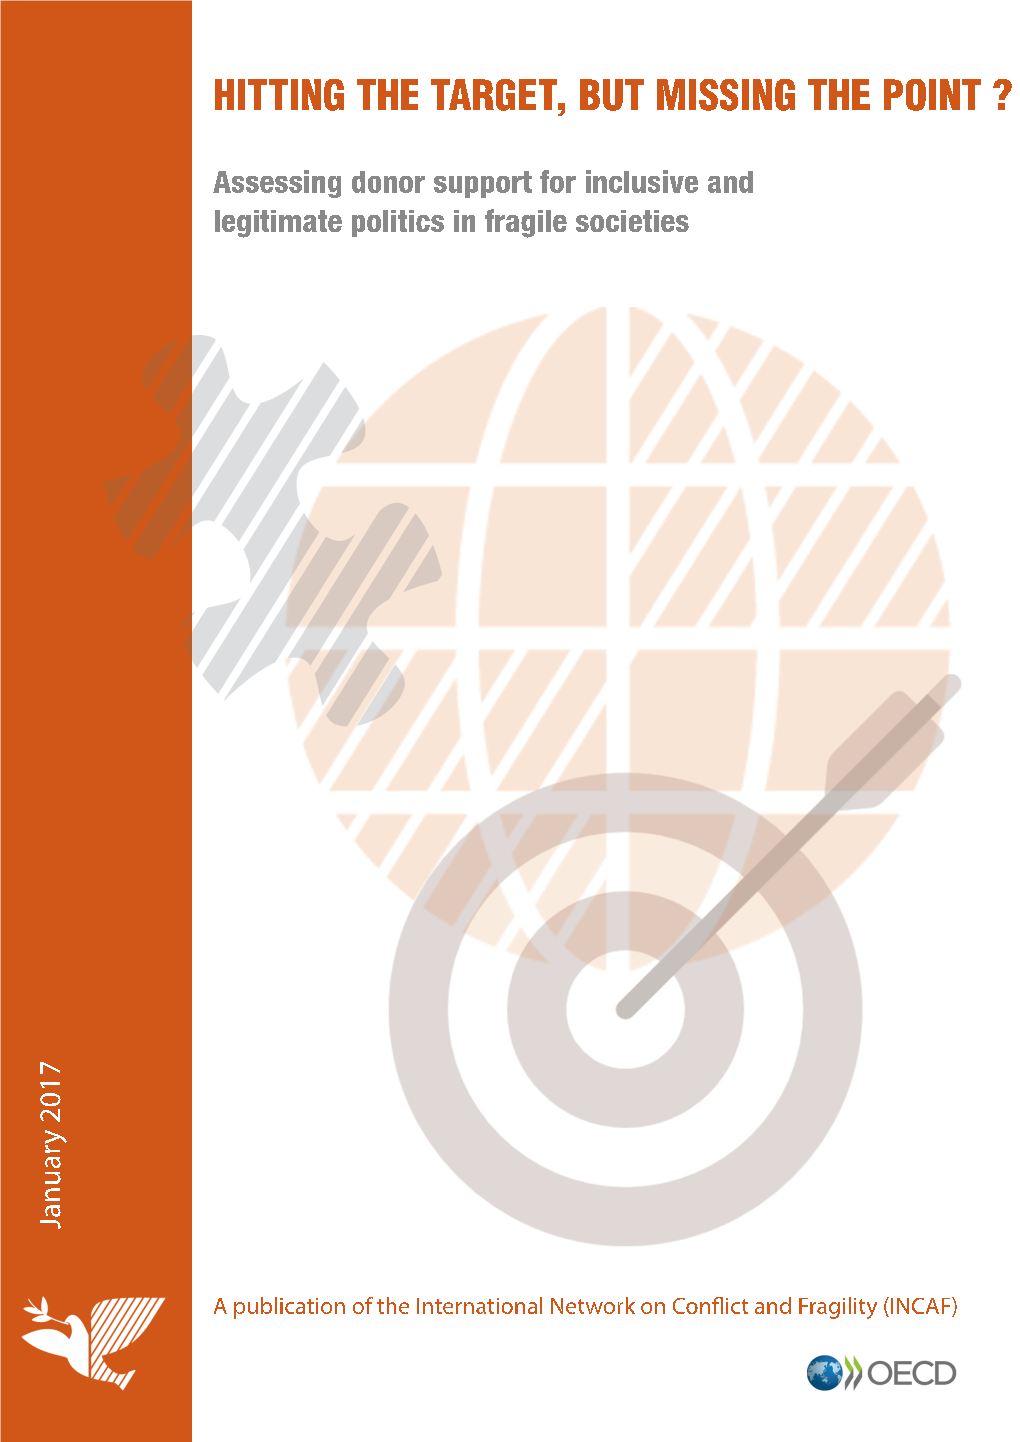 HITTING the TARGET, but MISSING the POINT? Assessing Donor Support for Inclusive and Legitimate Politics in Fragile Societies